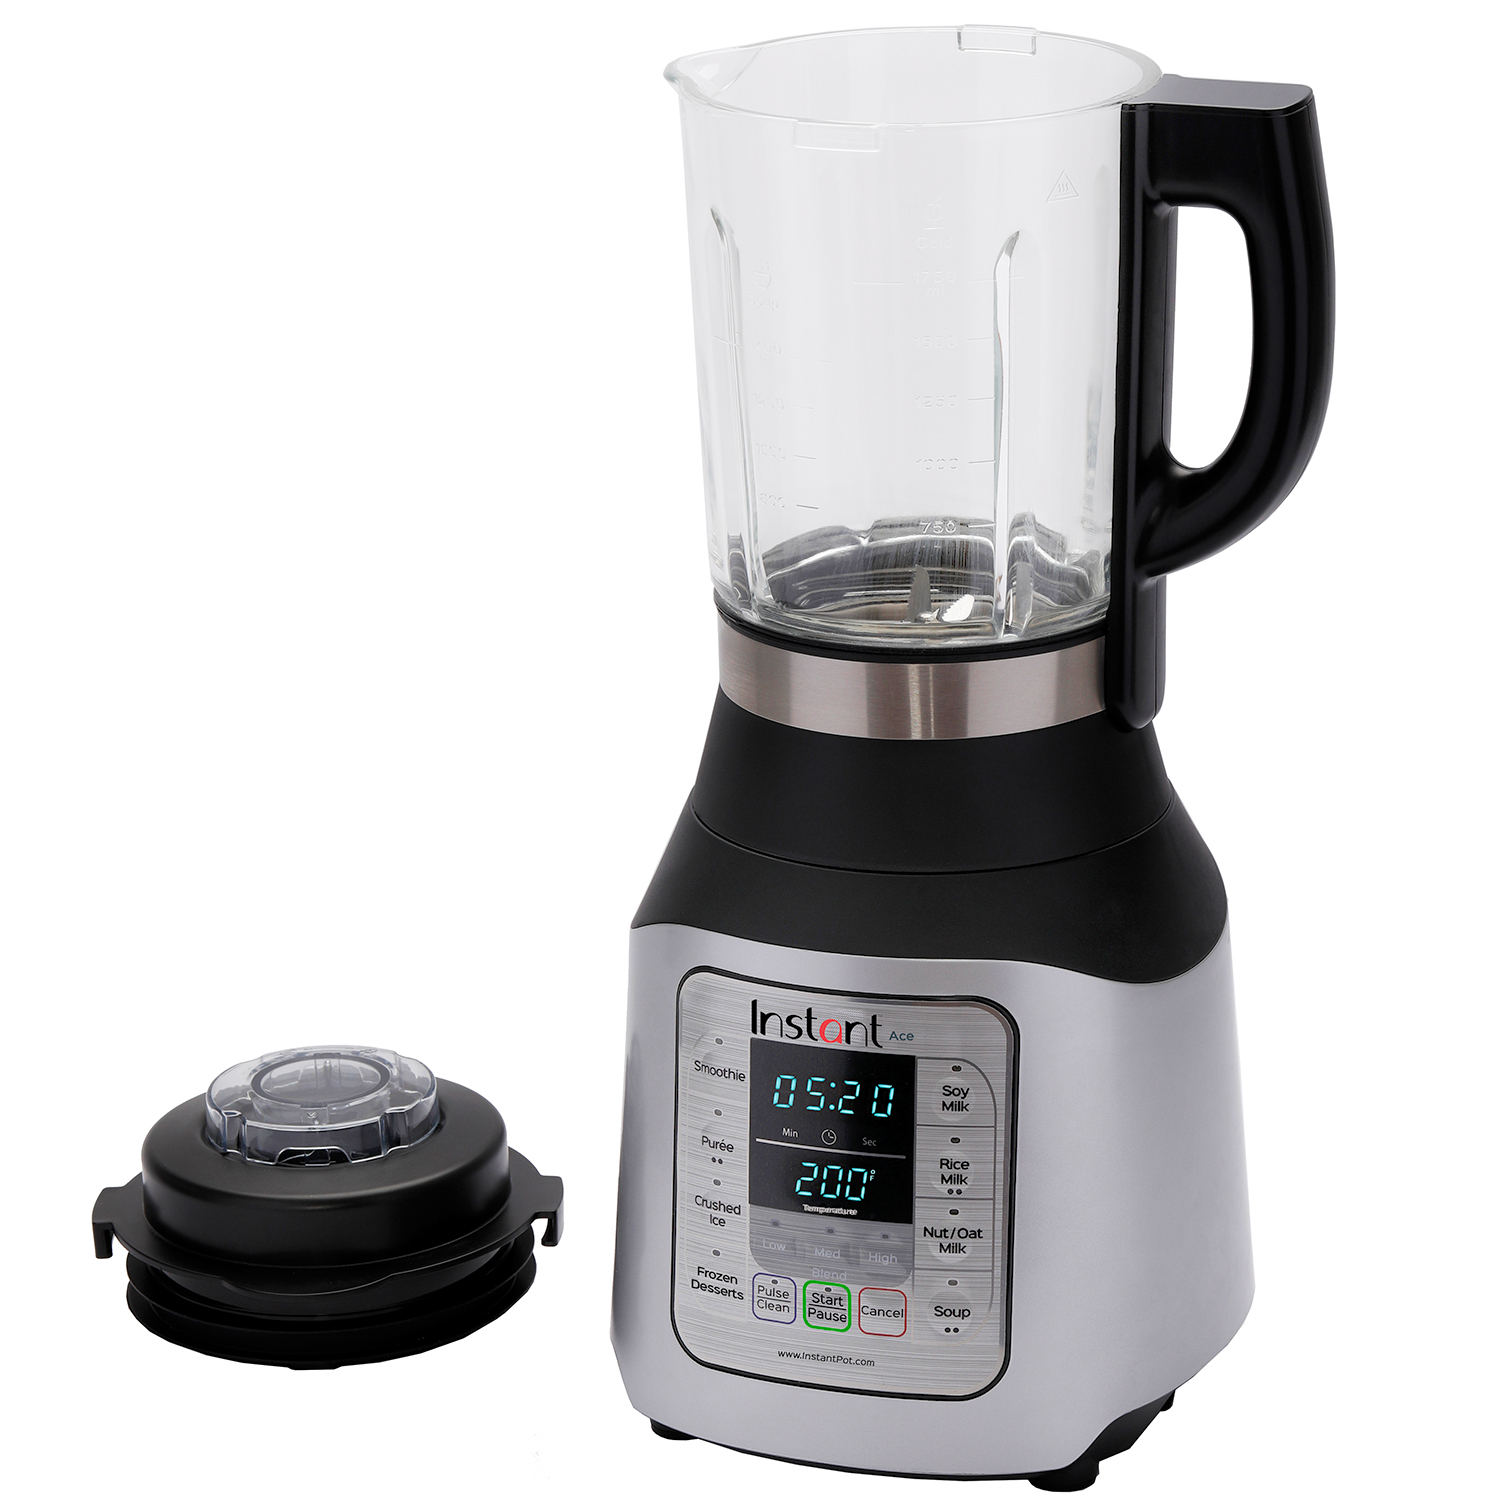 The Instant Pot Ace 60 blender is on sale at Walmart